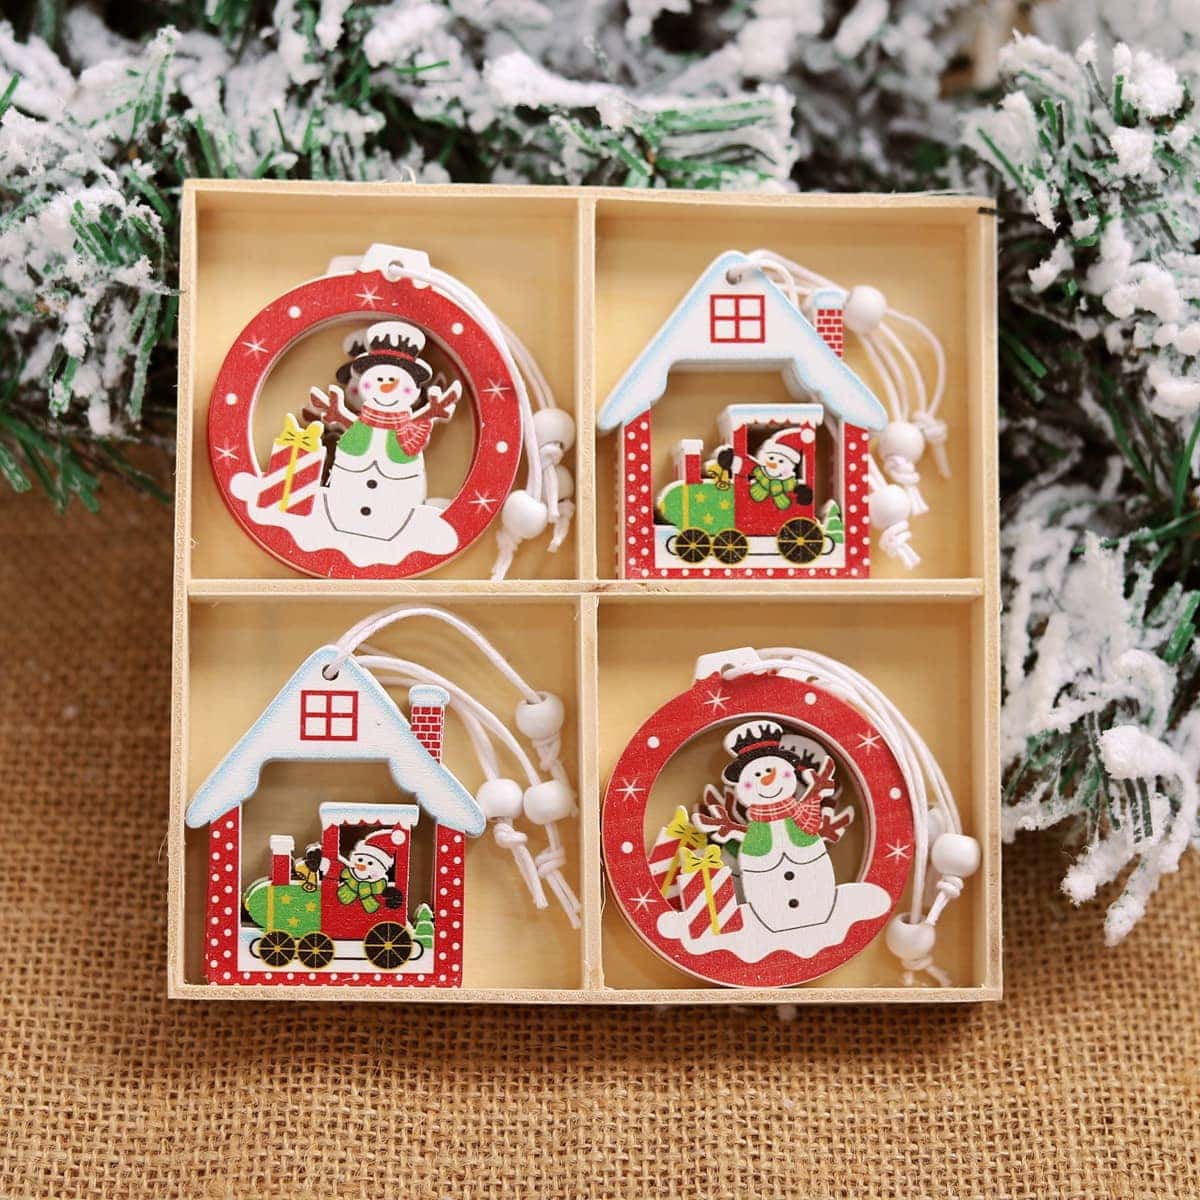 Wooden Snowman Decoration Ornaments Products Wood Christmas Tree Christmas Decorations